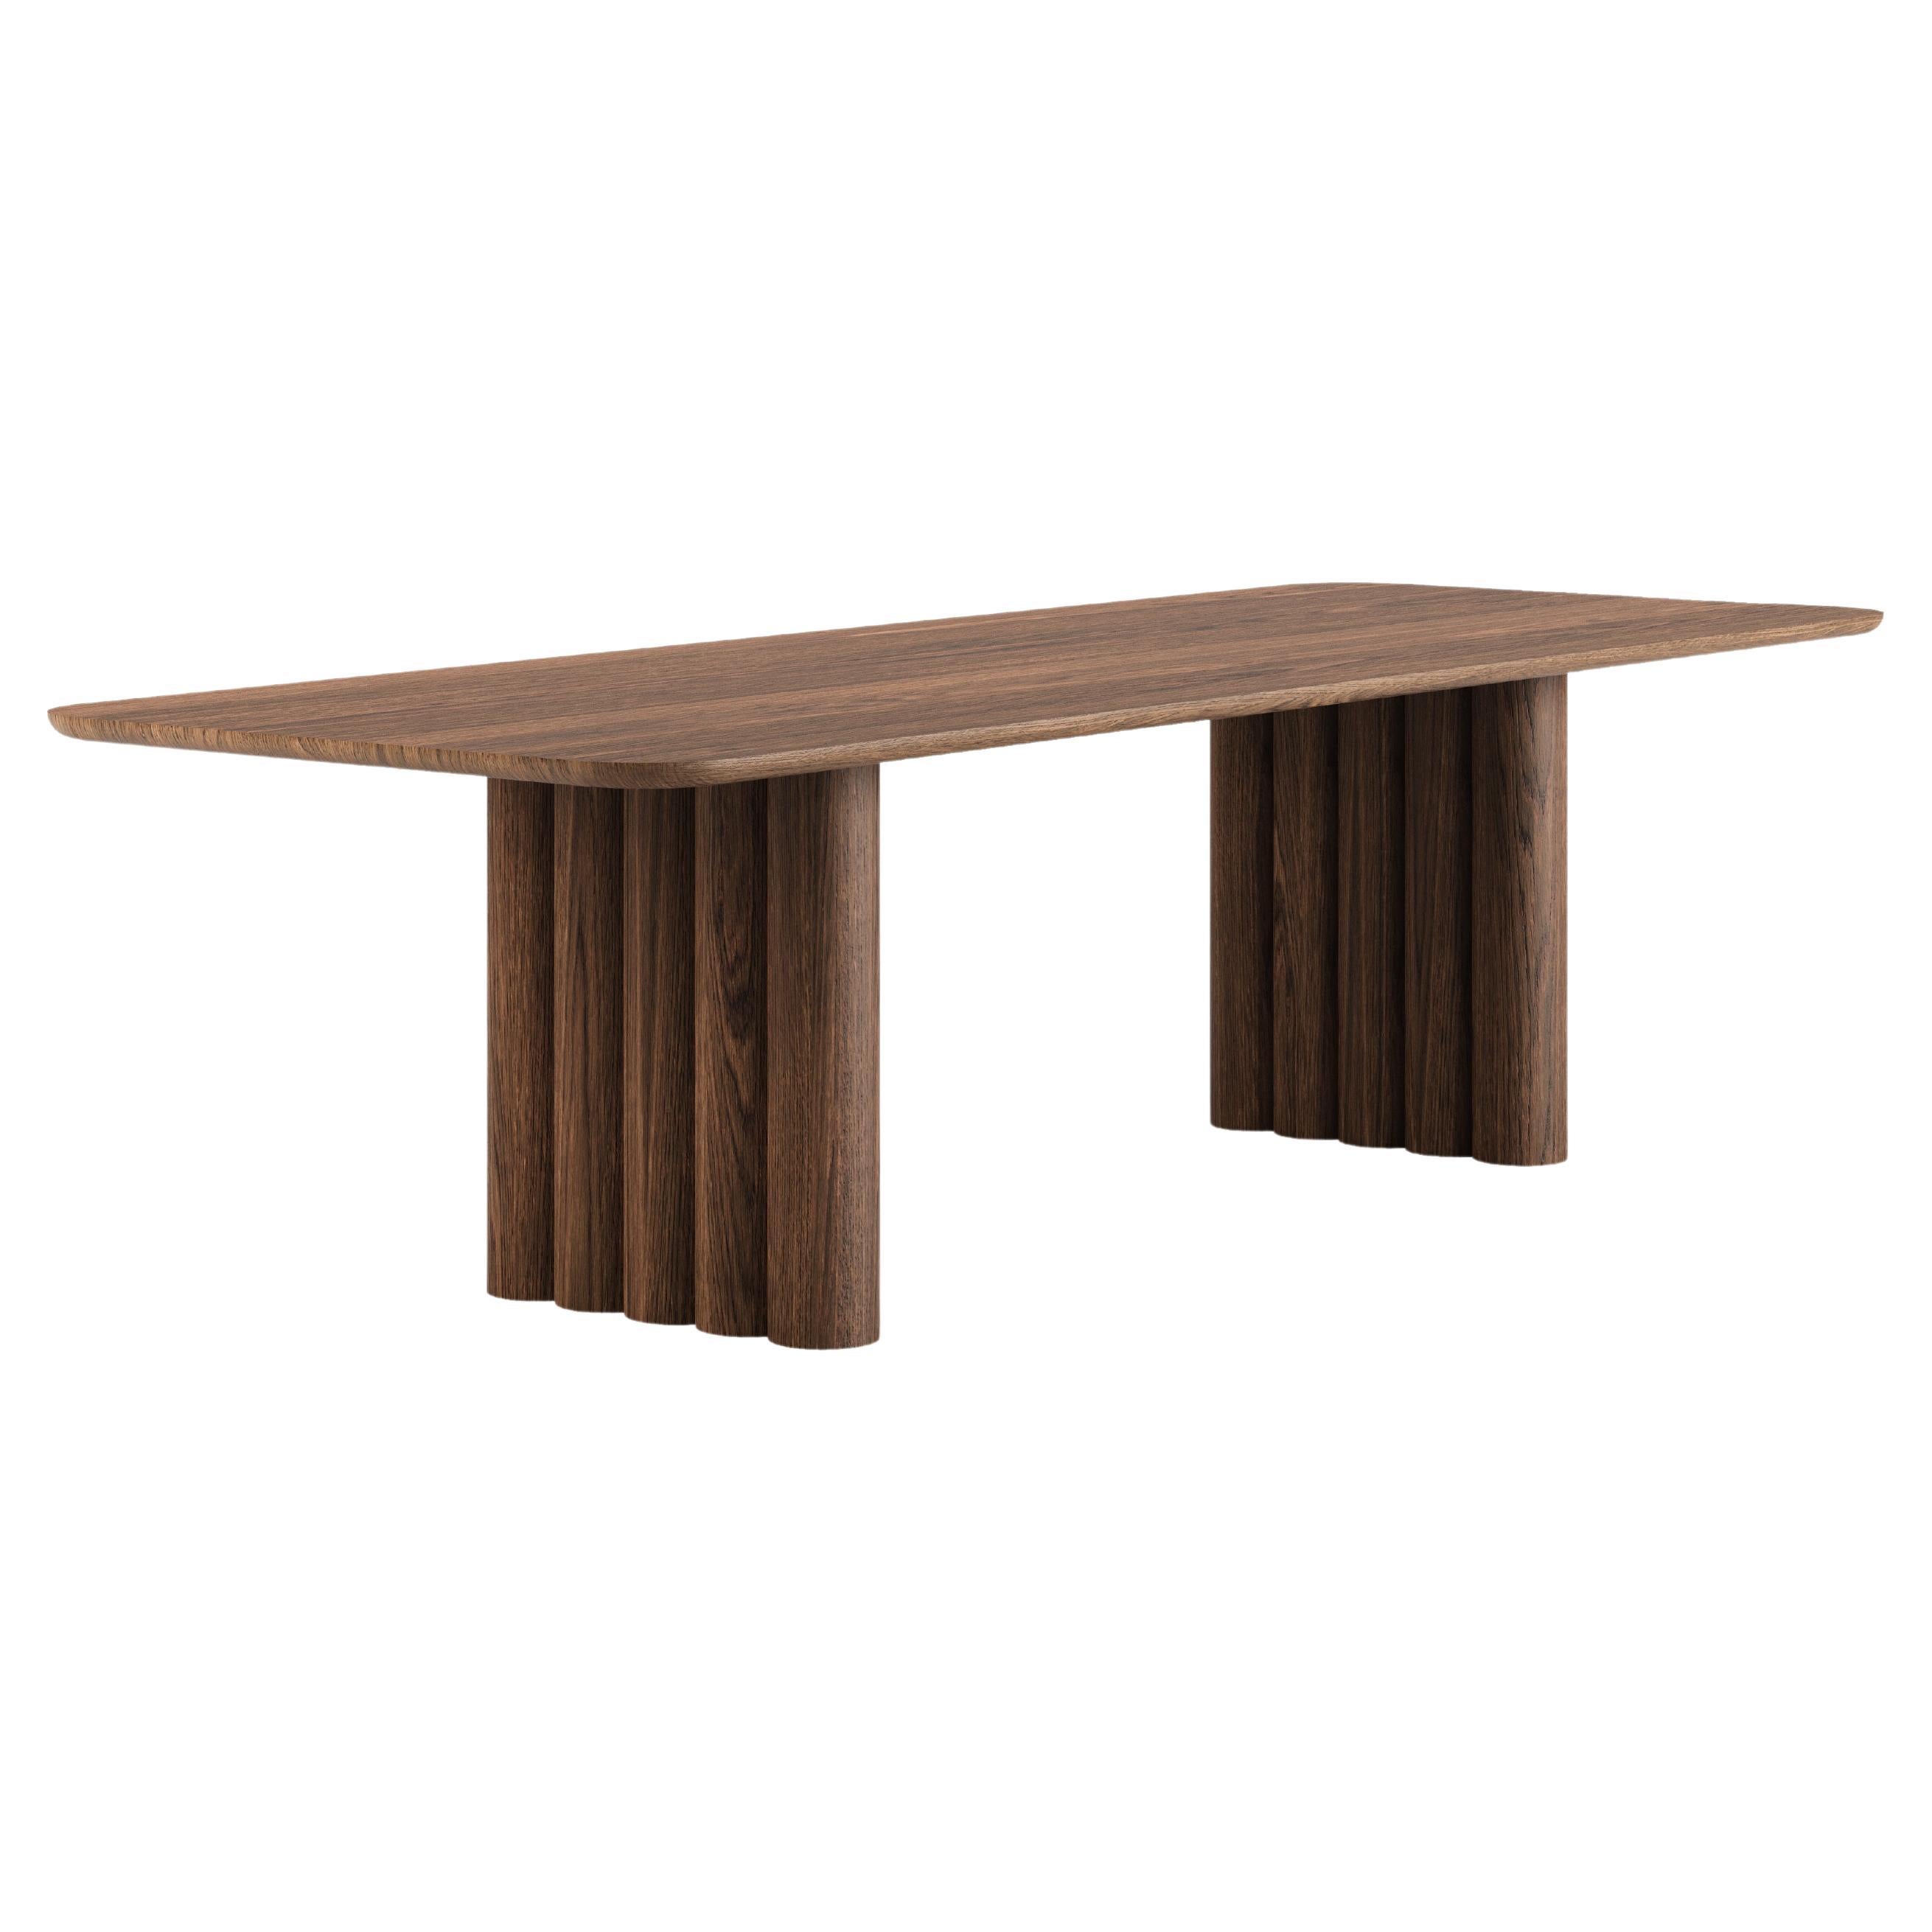 Contemporary Dining Table 'Plush' by Dk3, Smoked Oak or Walnut, 240, Rectangular For Sale